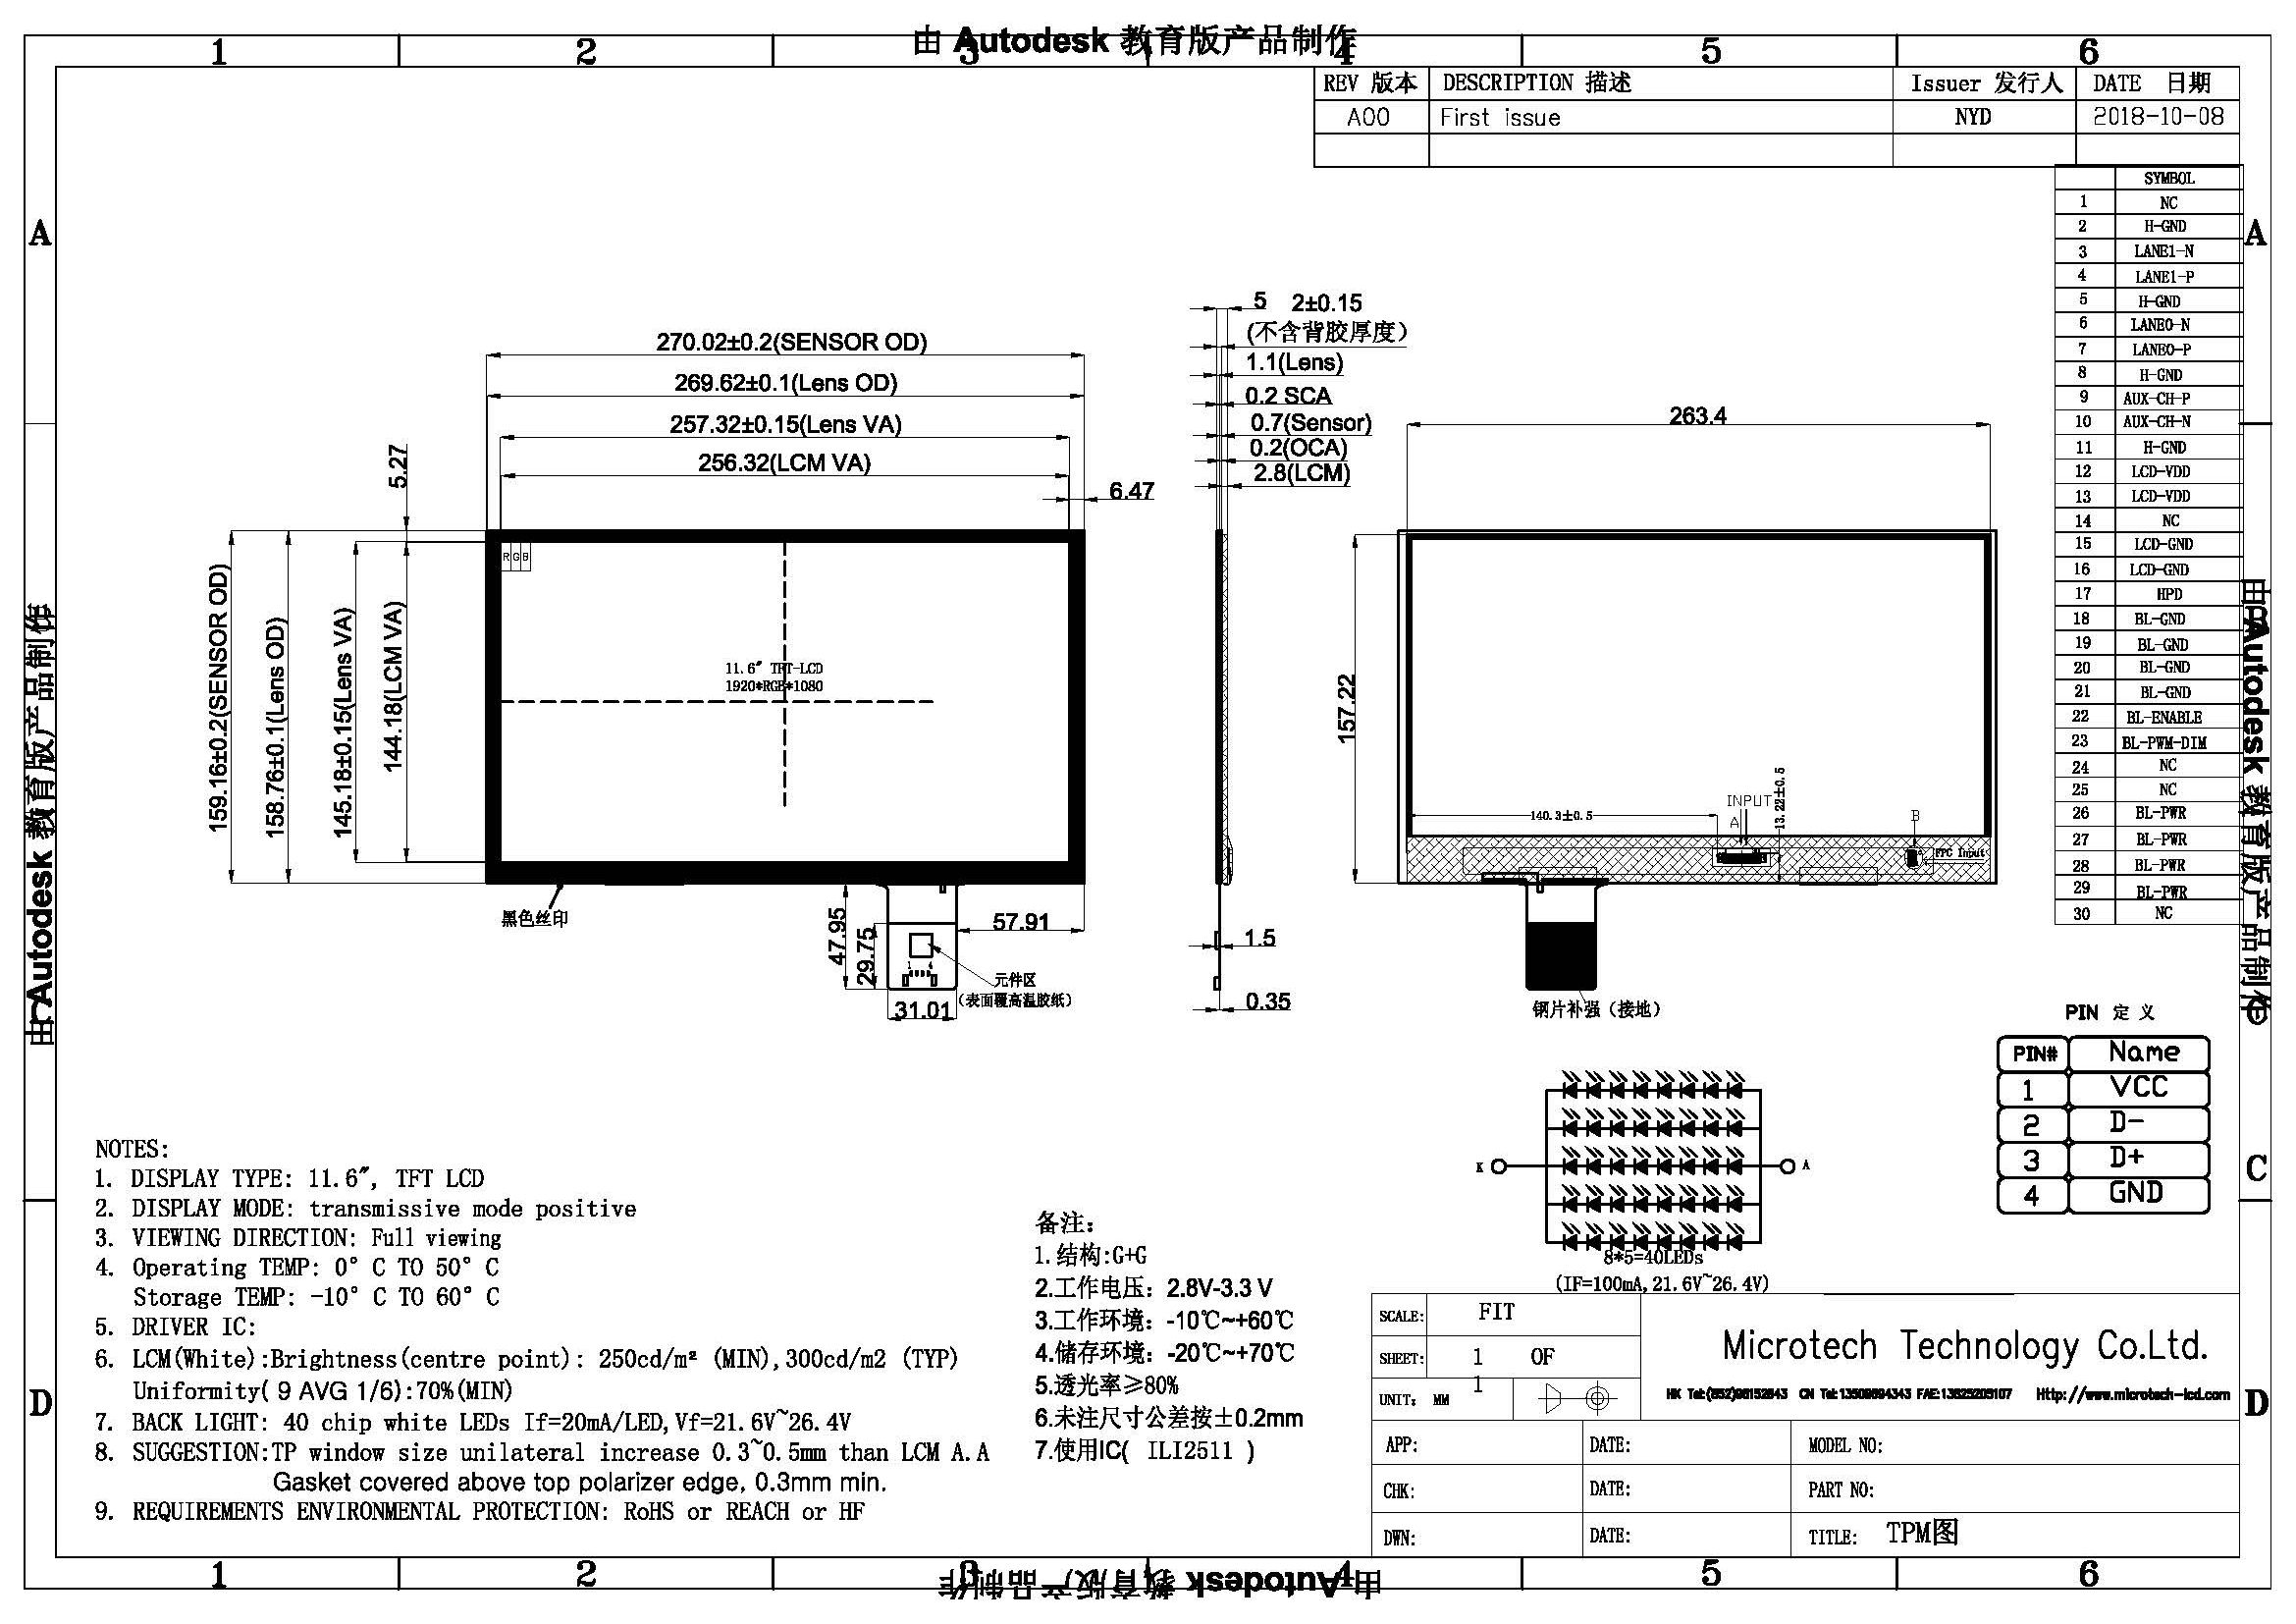 11.6 inch LCD Module with Capacitive Touch Panel